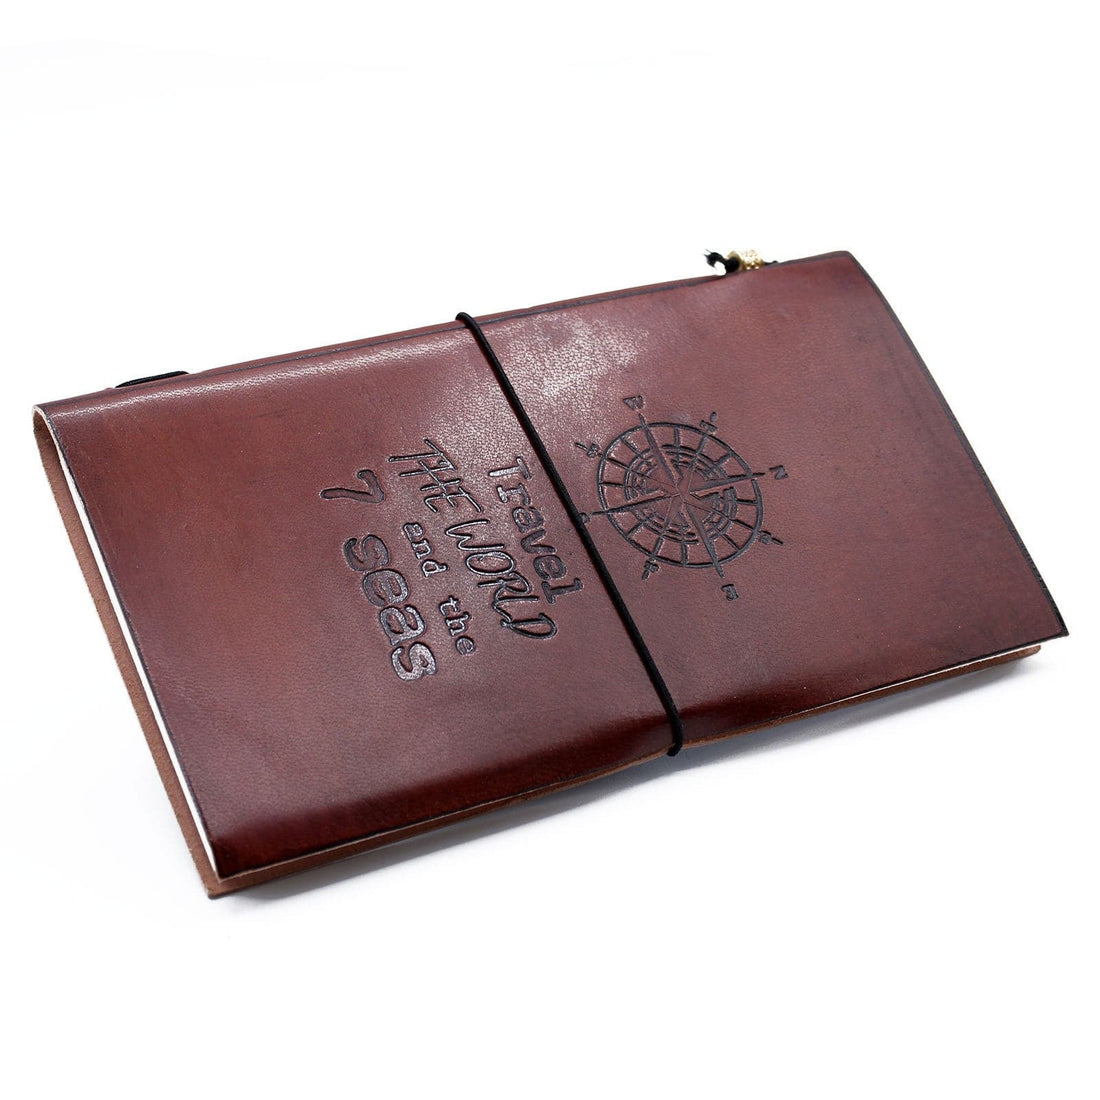 Handmade Leather Journal - Travel the World - Brown (80 pages) - best price from Maltashopper.com MSJ-10